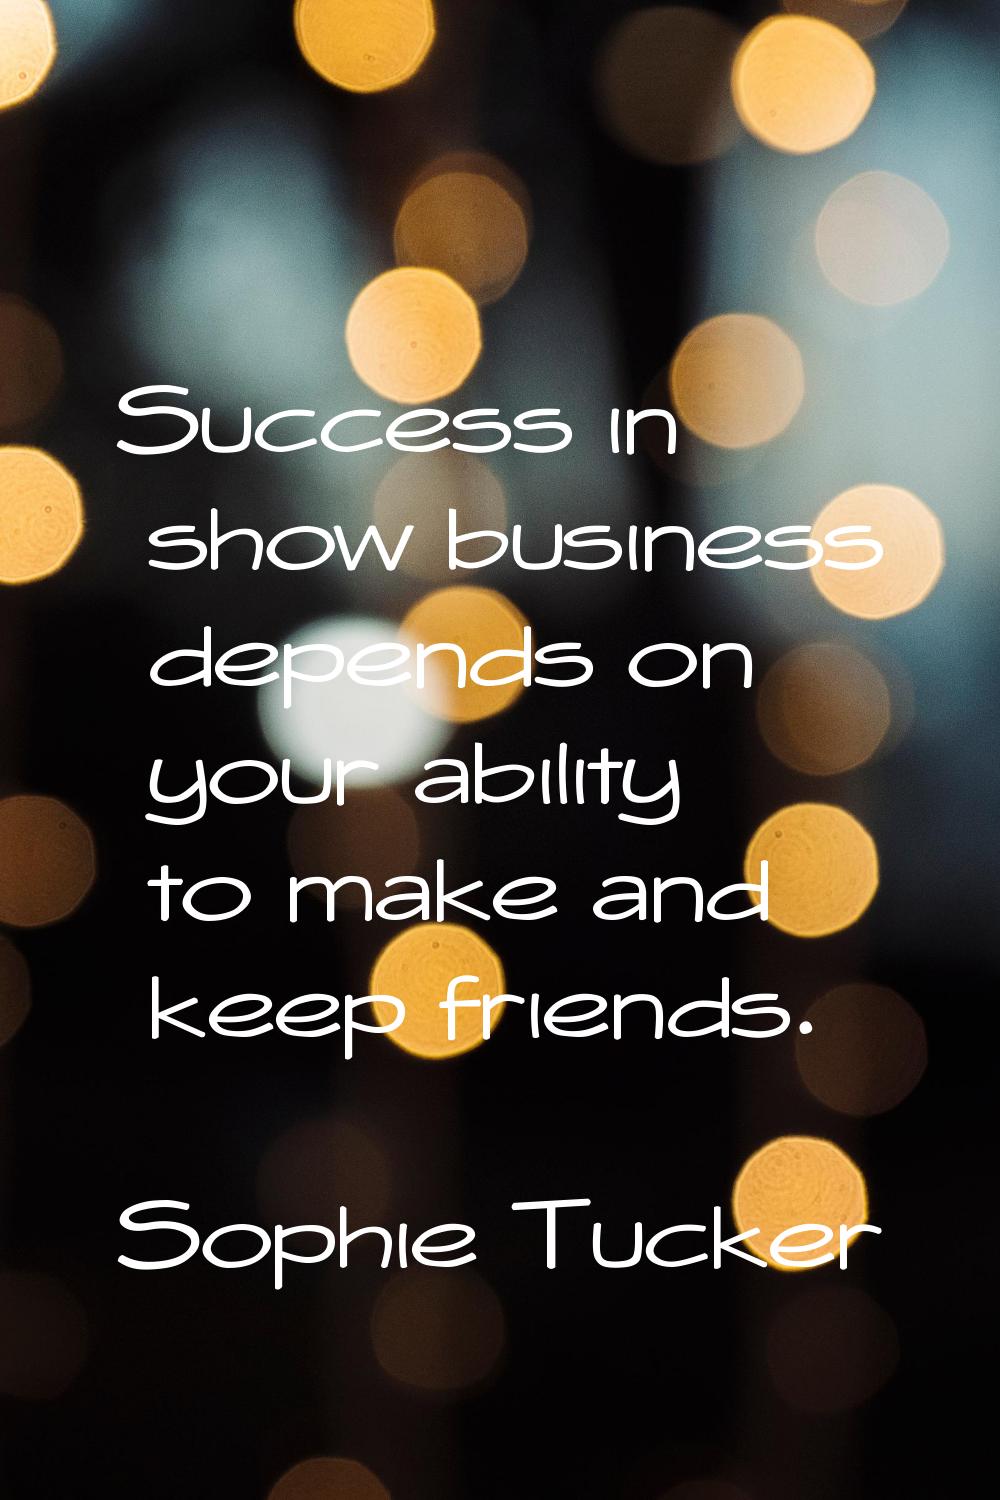 Success in show business depends on your ability to make and keep friends.